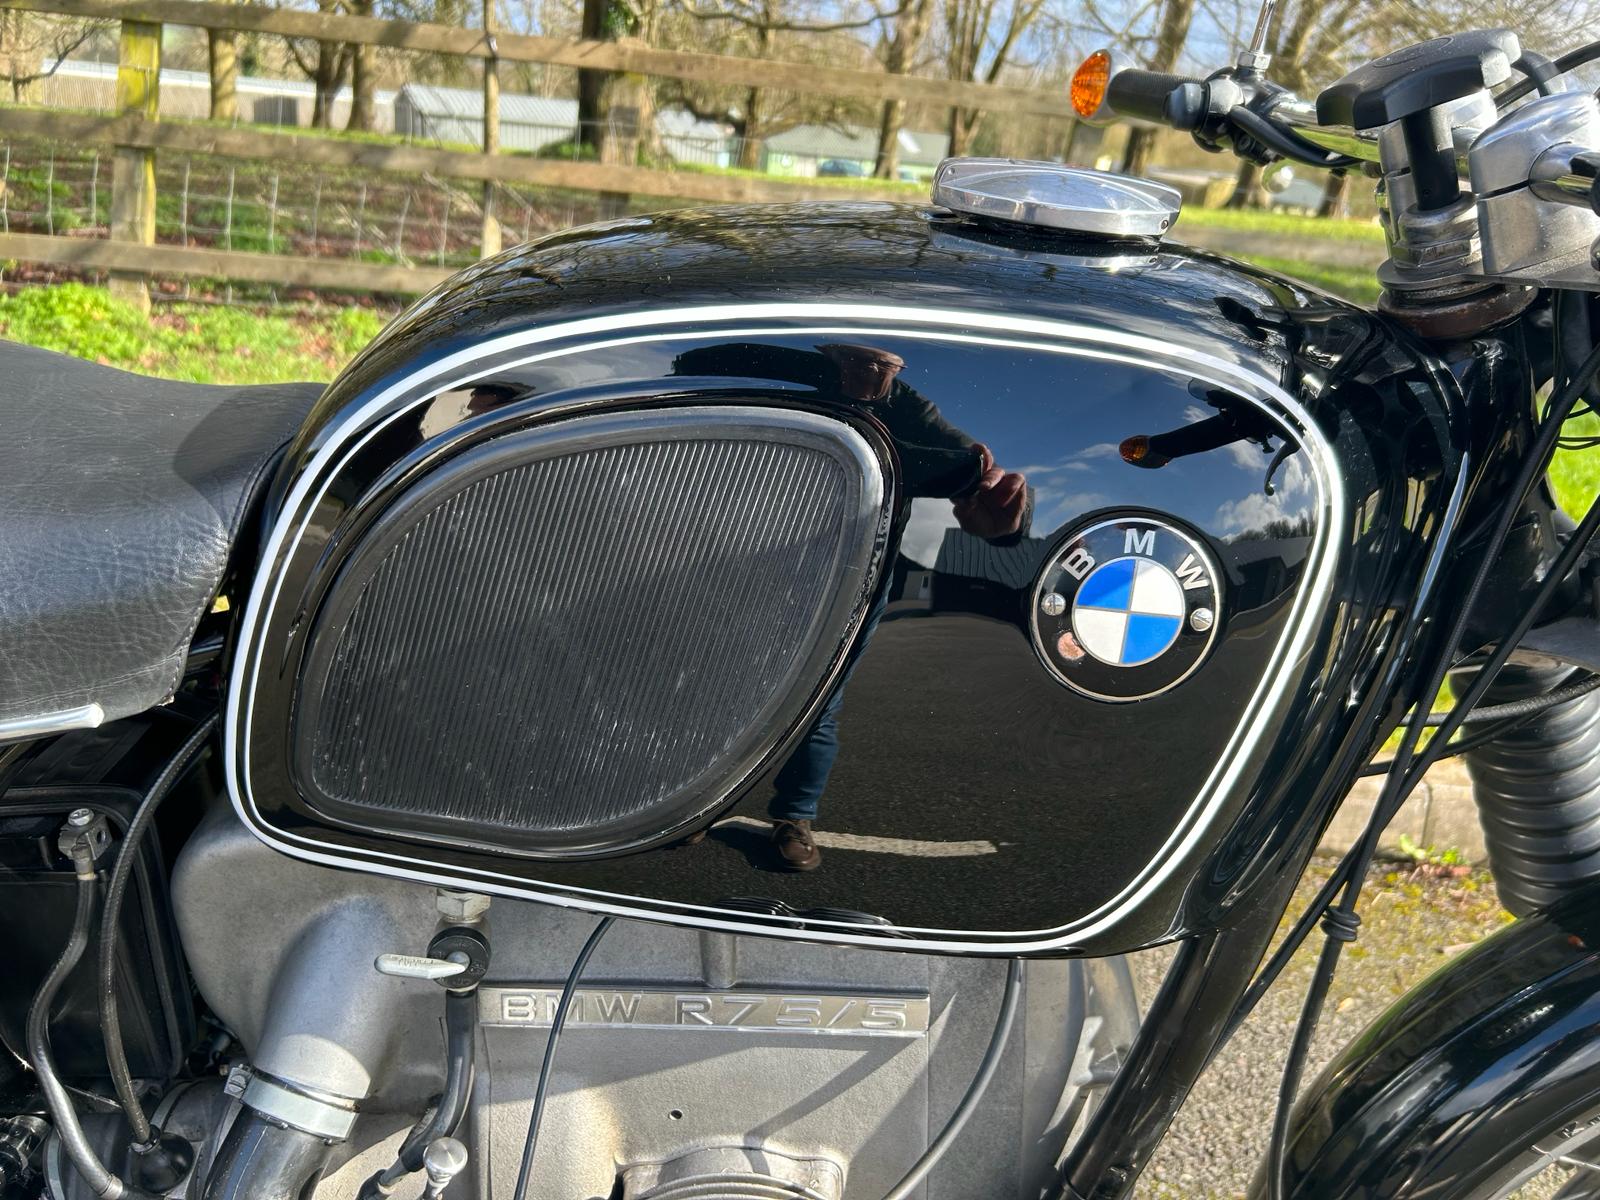 A BMW R75/5 MOTORCYCLE .1971. 72452 MILES. EXCELLENT WELL RESTORED CONDITION, V5, MOT AND TAX - Image 15 of 17